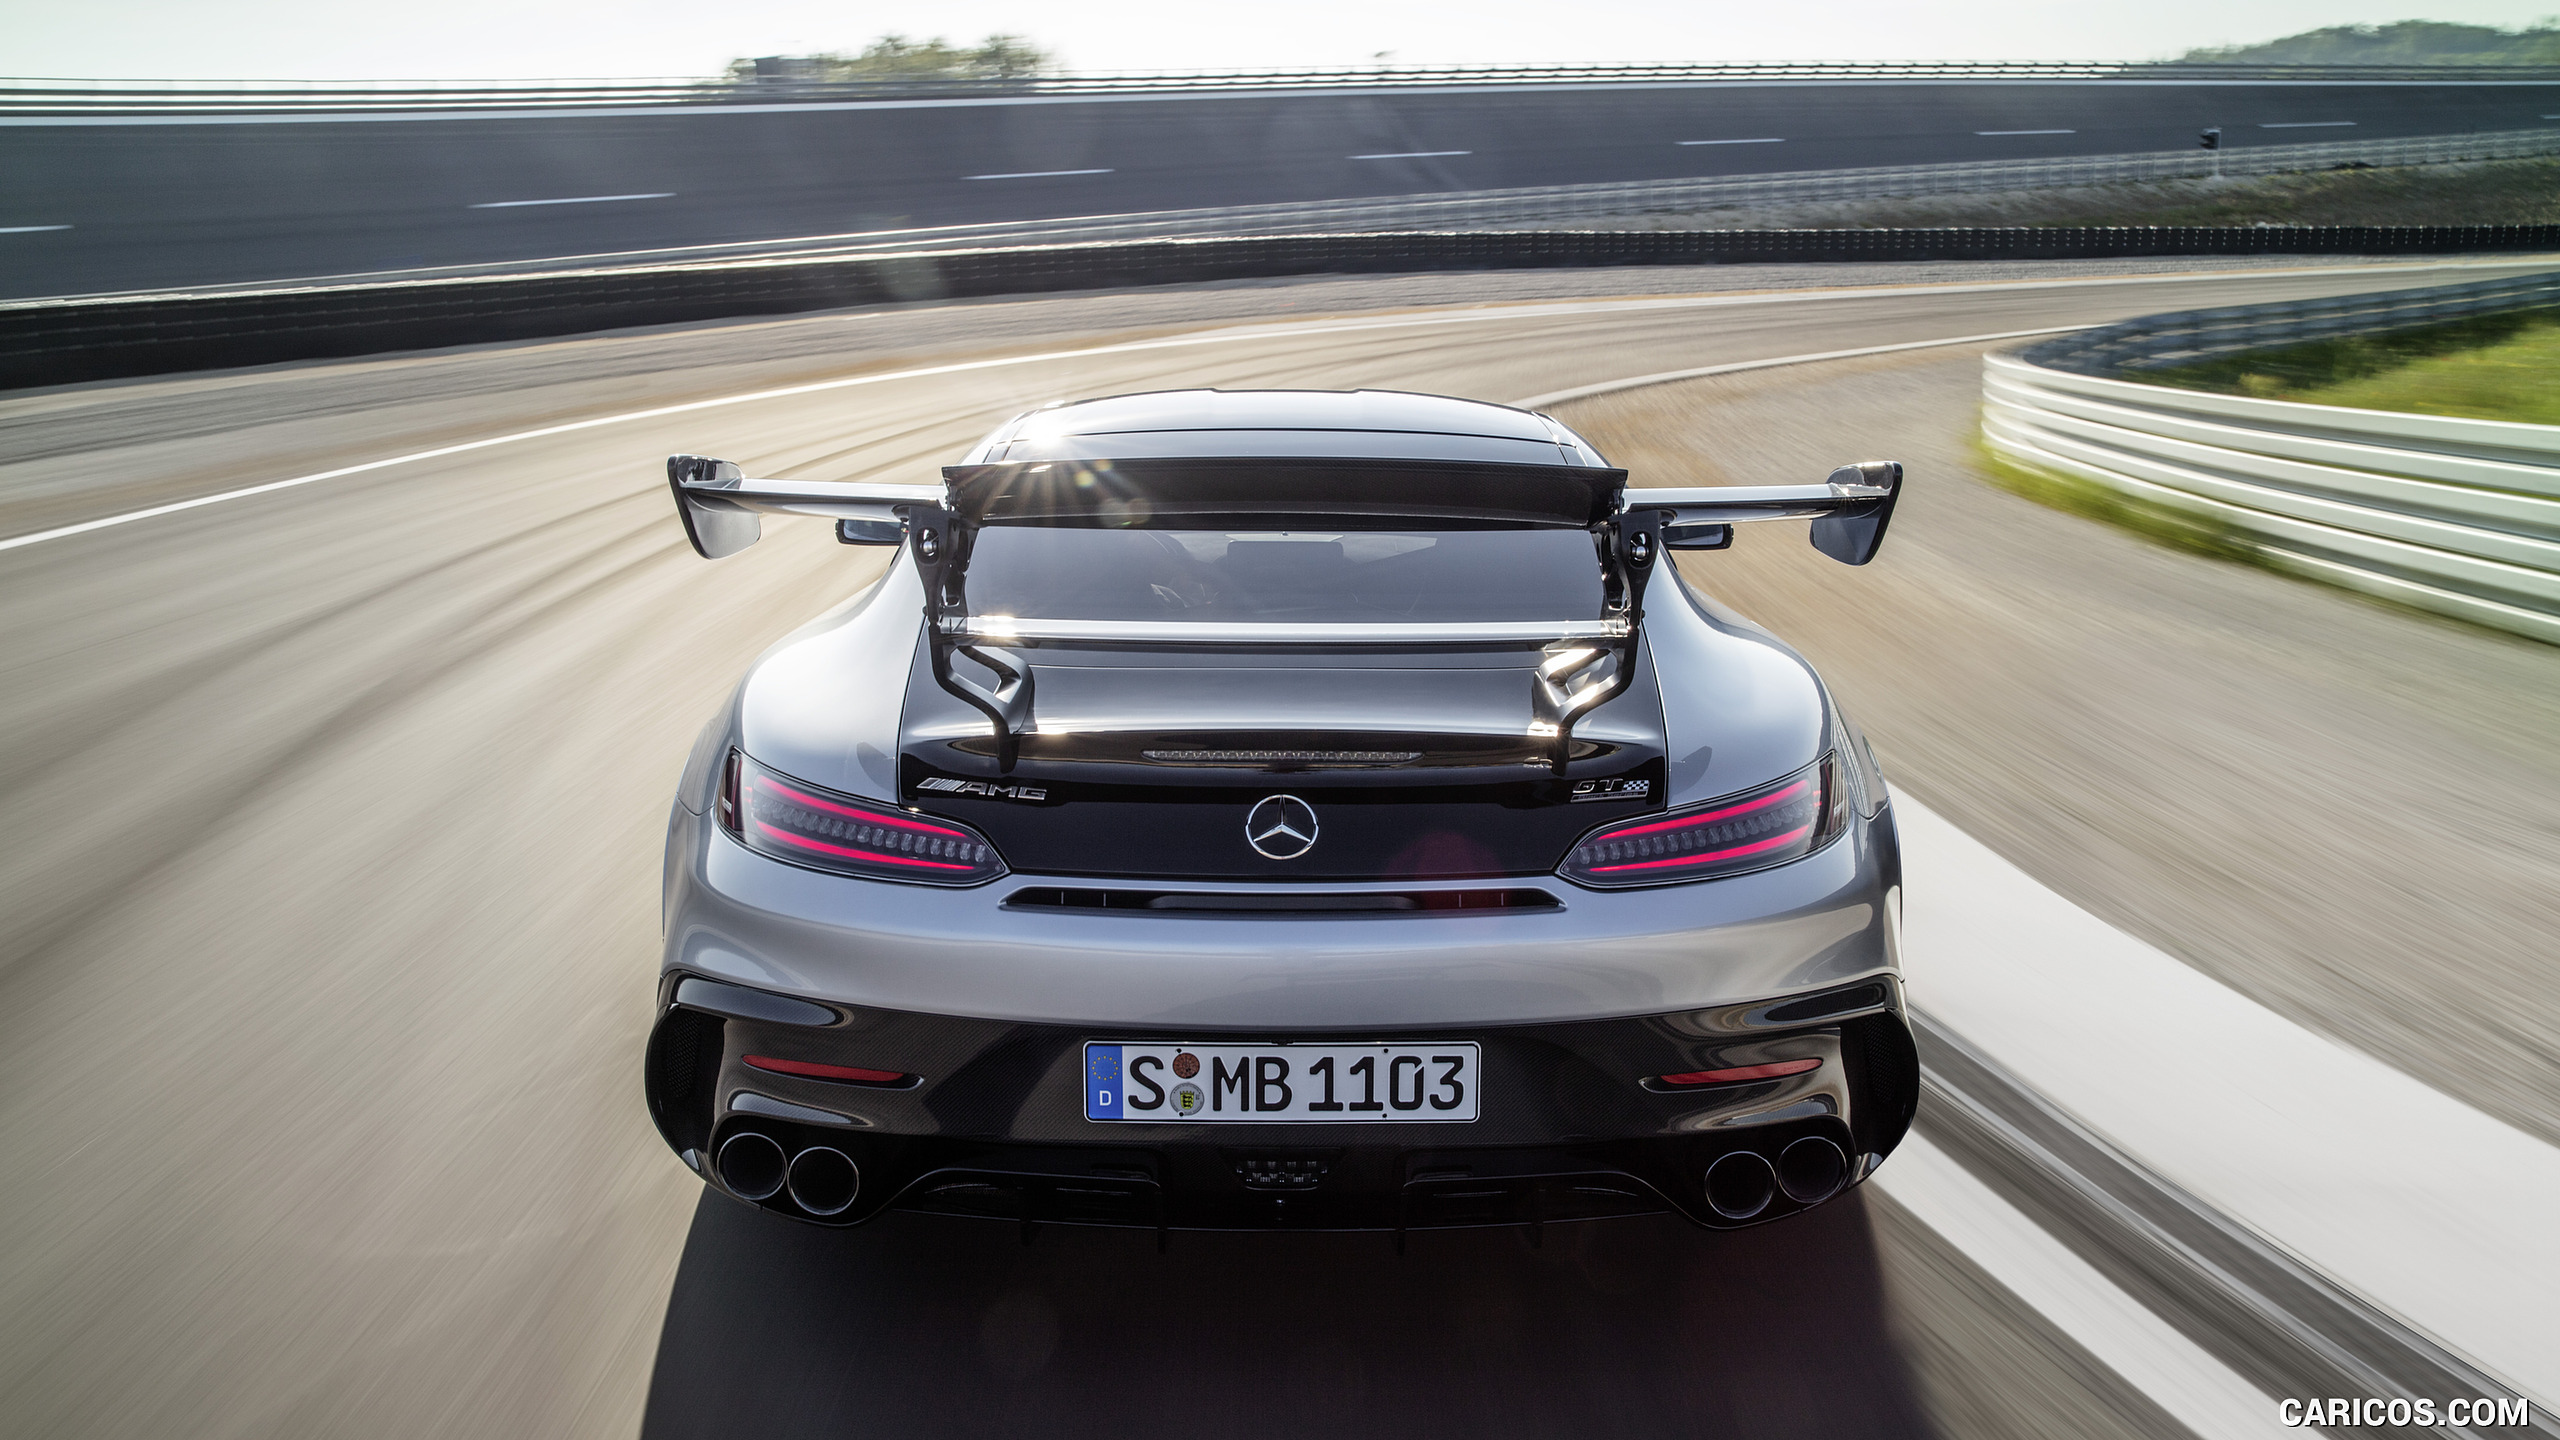 2021 Mercedes-AMG GT Black Series (Color: High Tech Silver) - Rear, #2 of 215